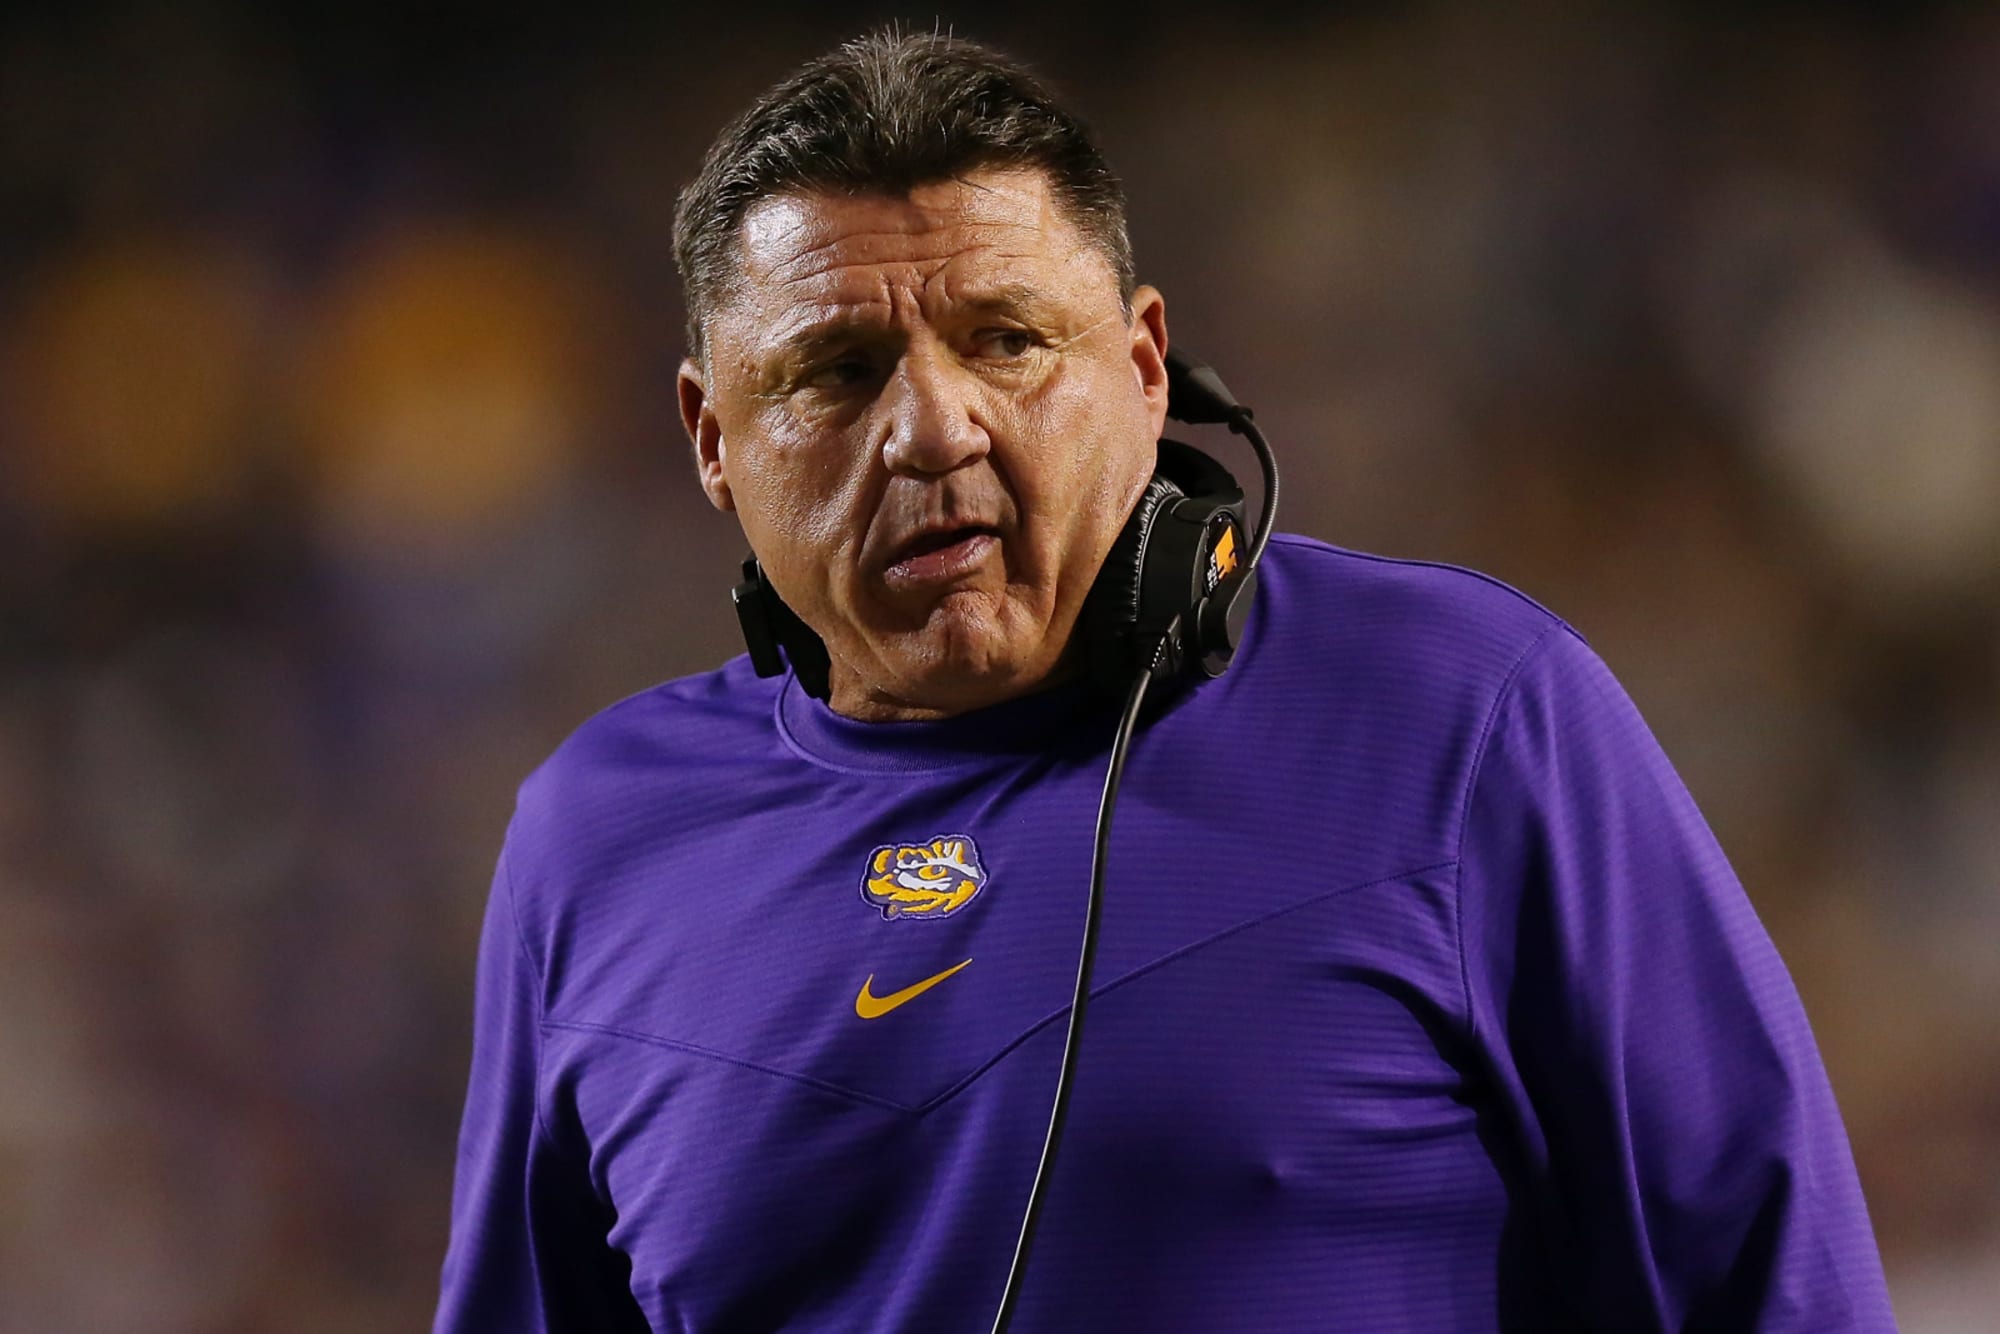 No, Coach O and Chris Petersen are not candidates for UNLV